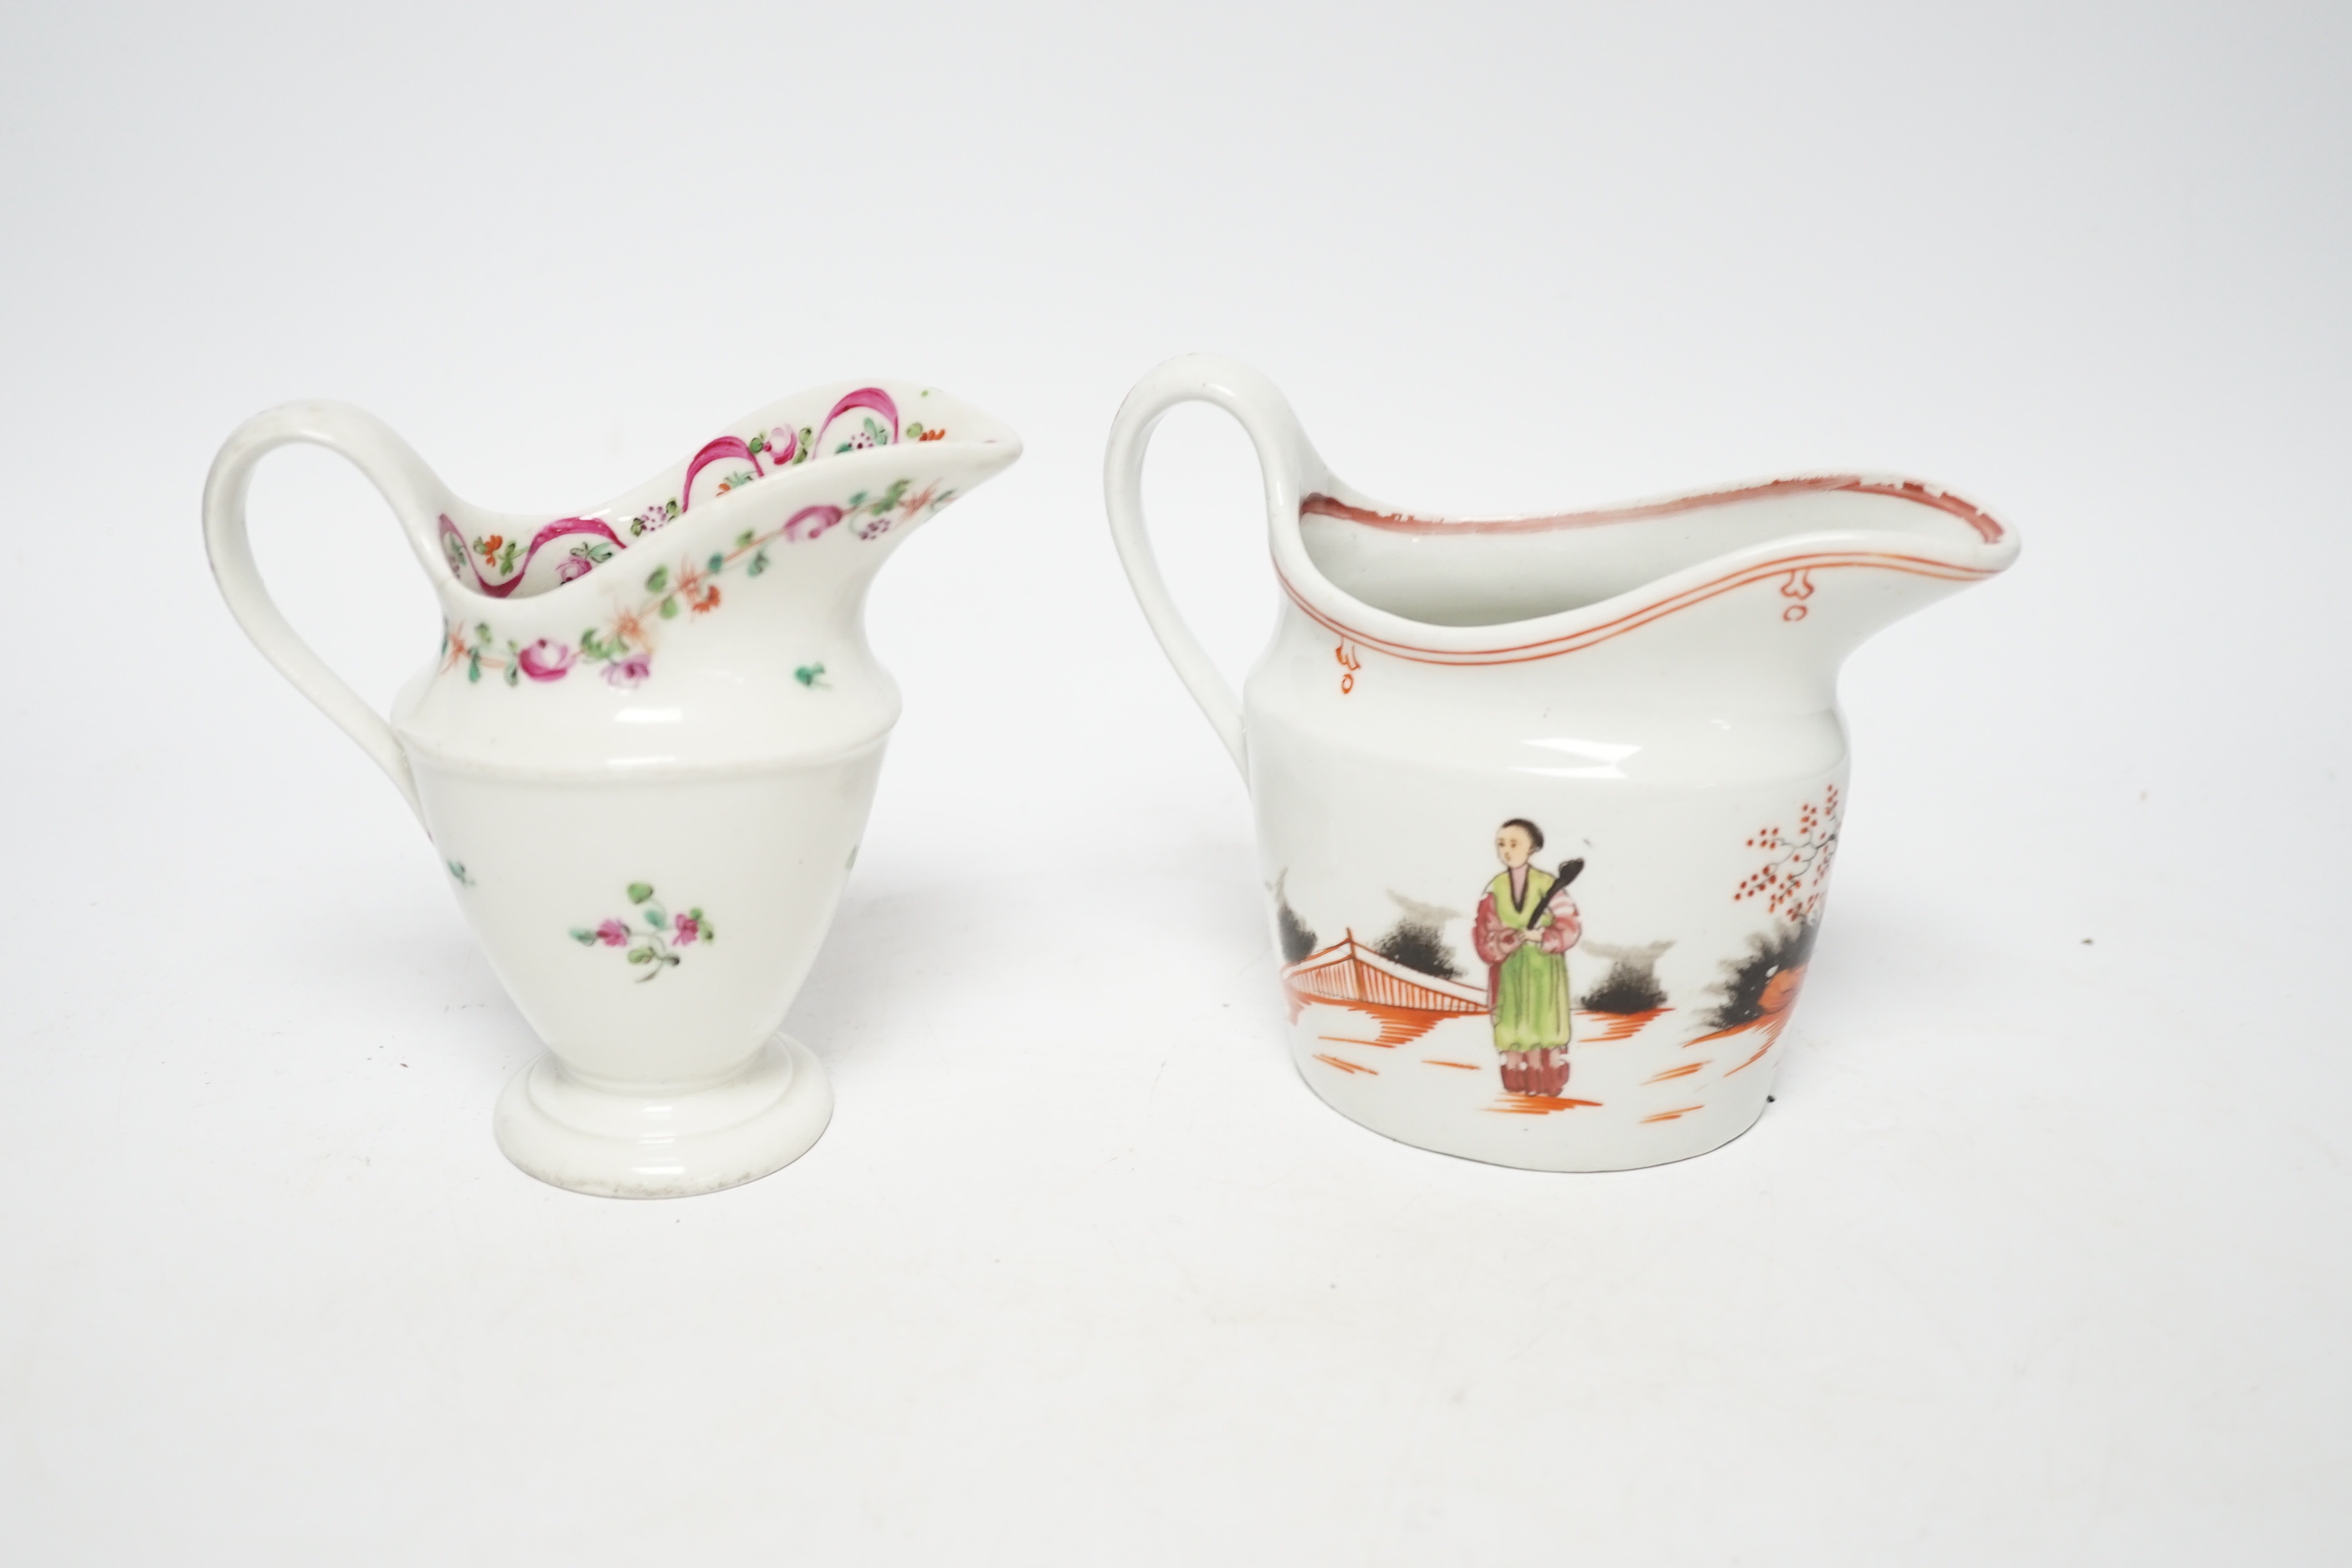 An 18th century Newhall teapot stand and a New Hall milk jug, c.1810 and a Keeley milk jug